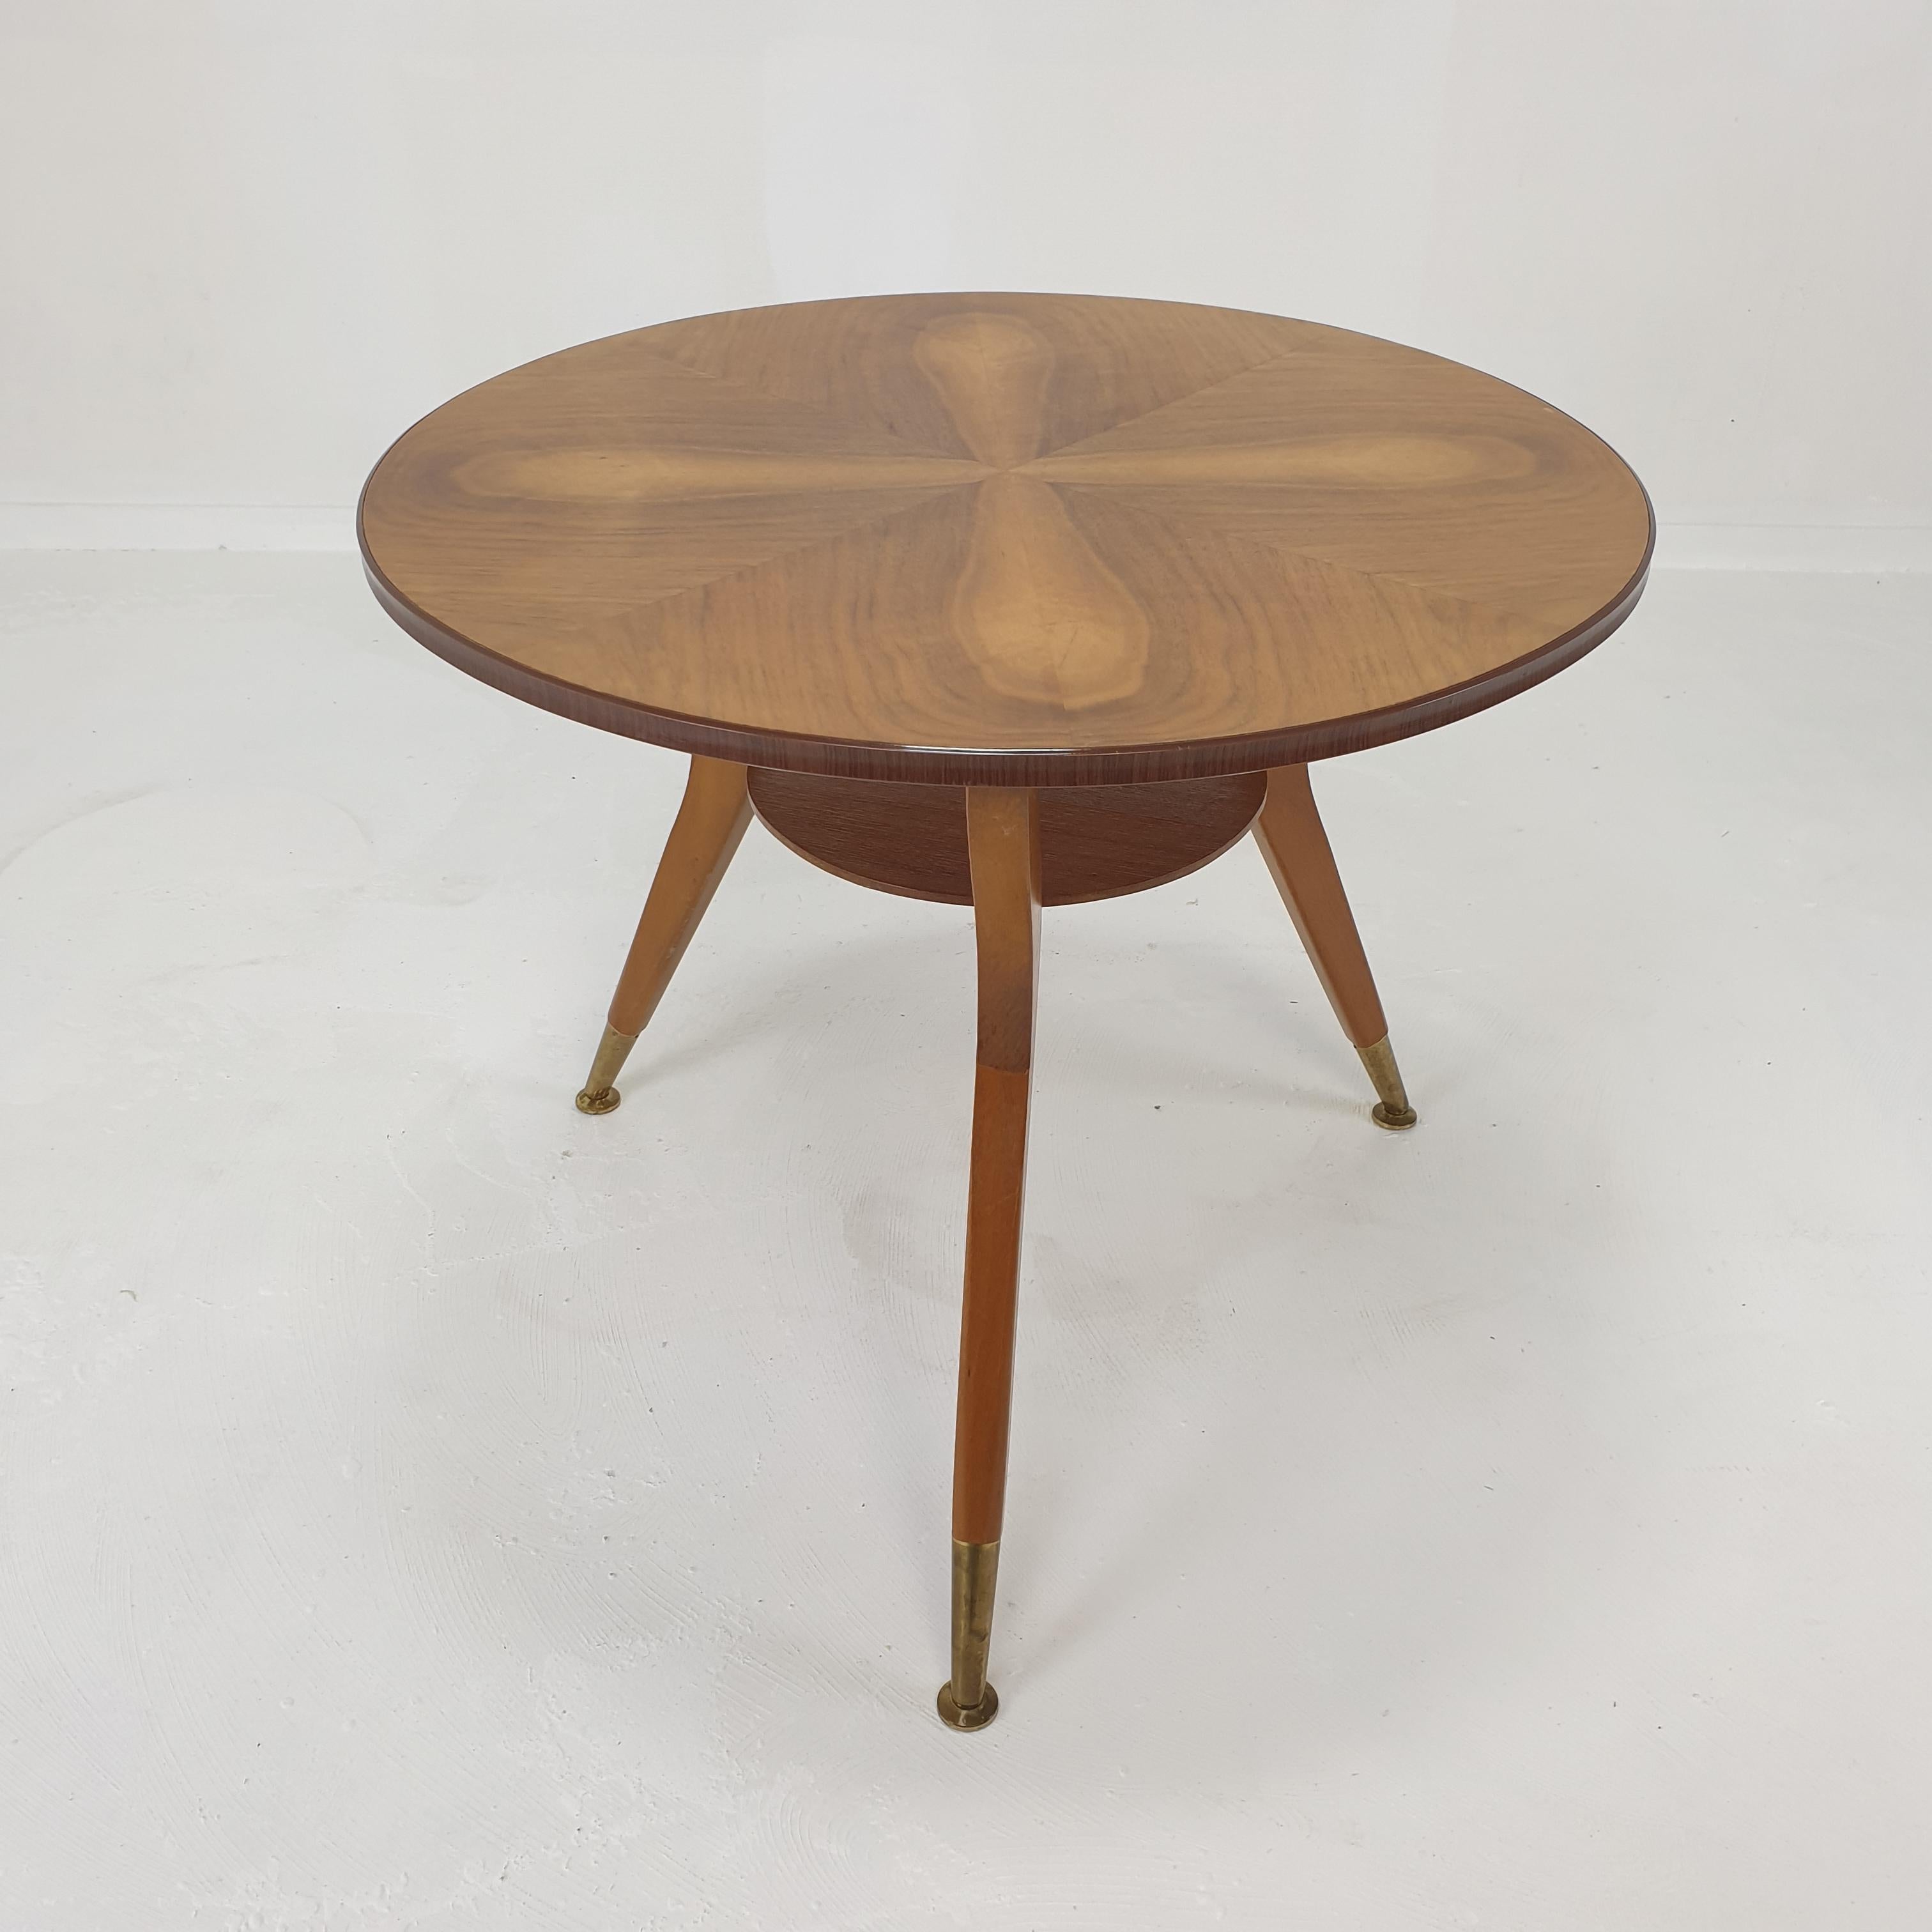 Midcentury Italian Wooden Coffee or Side Table with Brass Feet, 1960s For Sale 5